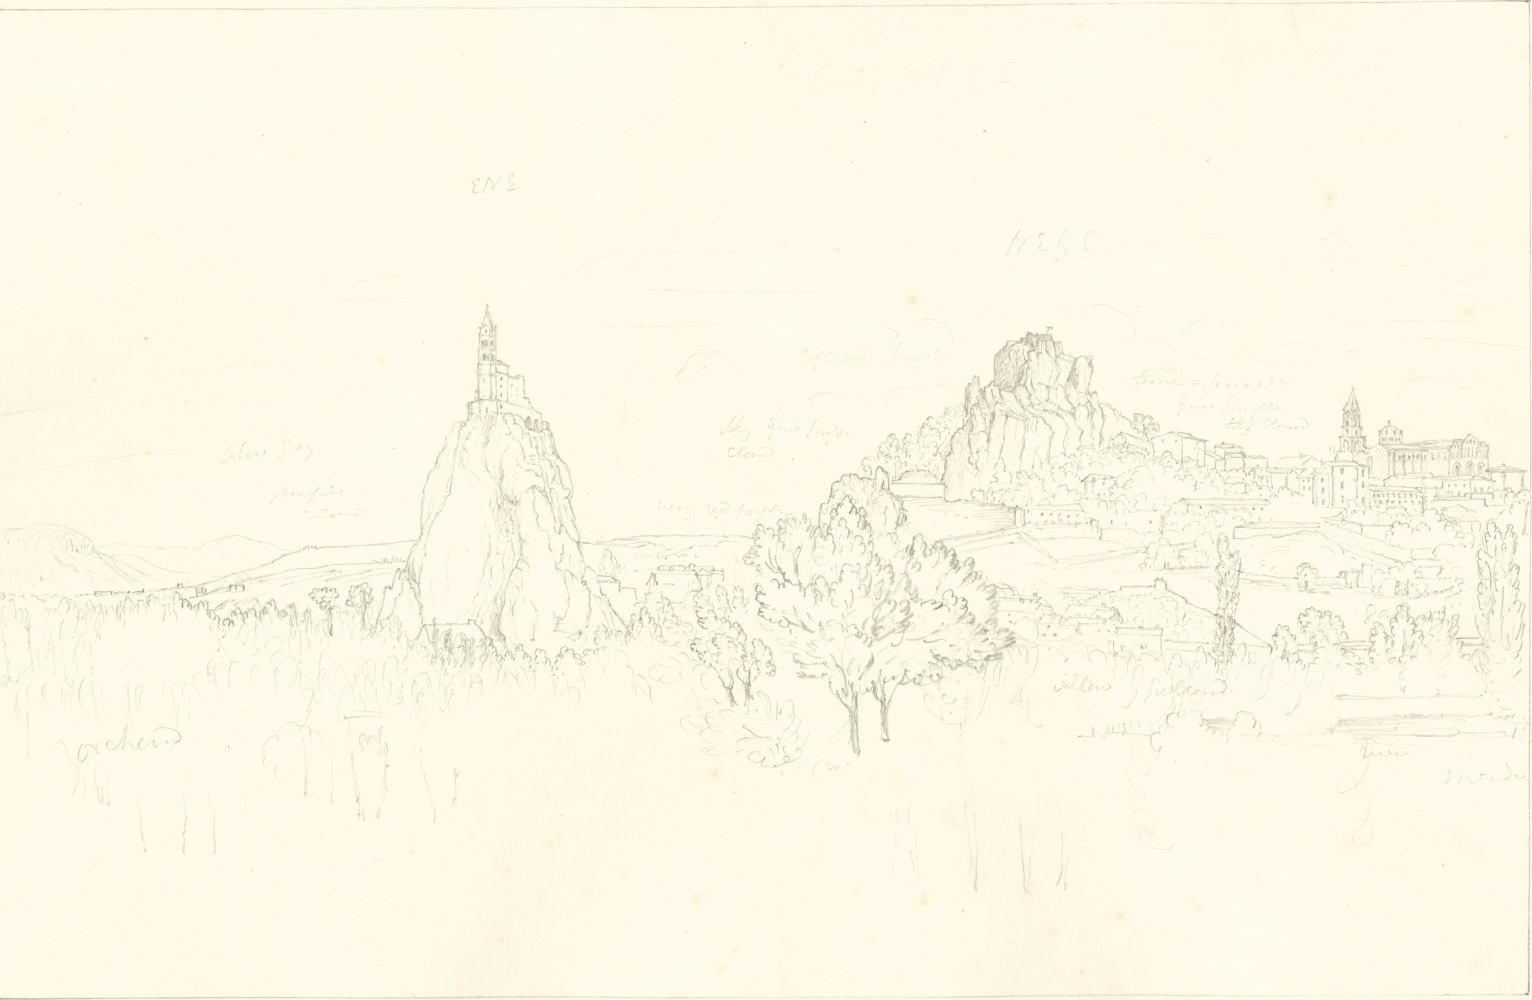 Sir John Frederick William HERSCHEL (English, 1792-1872) &quot;No 495 Le Puy. From across the bridge. The Church of St Michel, The Rocher du Corneille &amp; the Cathedral”, 19 October 1850 Camera lucida drawing, pencil on paper 21.6 x 33.3 cm on 25.2 x 38.5 cm paper Numbered, signed, dated and titled “No 495 / JFW Herschel del. Cam. Luc. Oct. 19, 1850 / Le Puy. From across the bridge. The Church of St Michel bearing ENE, The Rocher du Corneille NE by E. / (by compass) &amp; the Cathedral” in ink in border